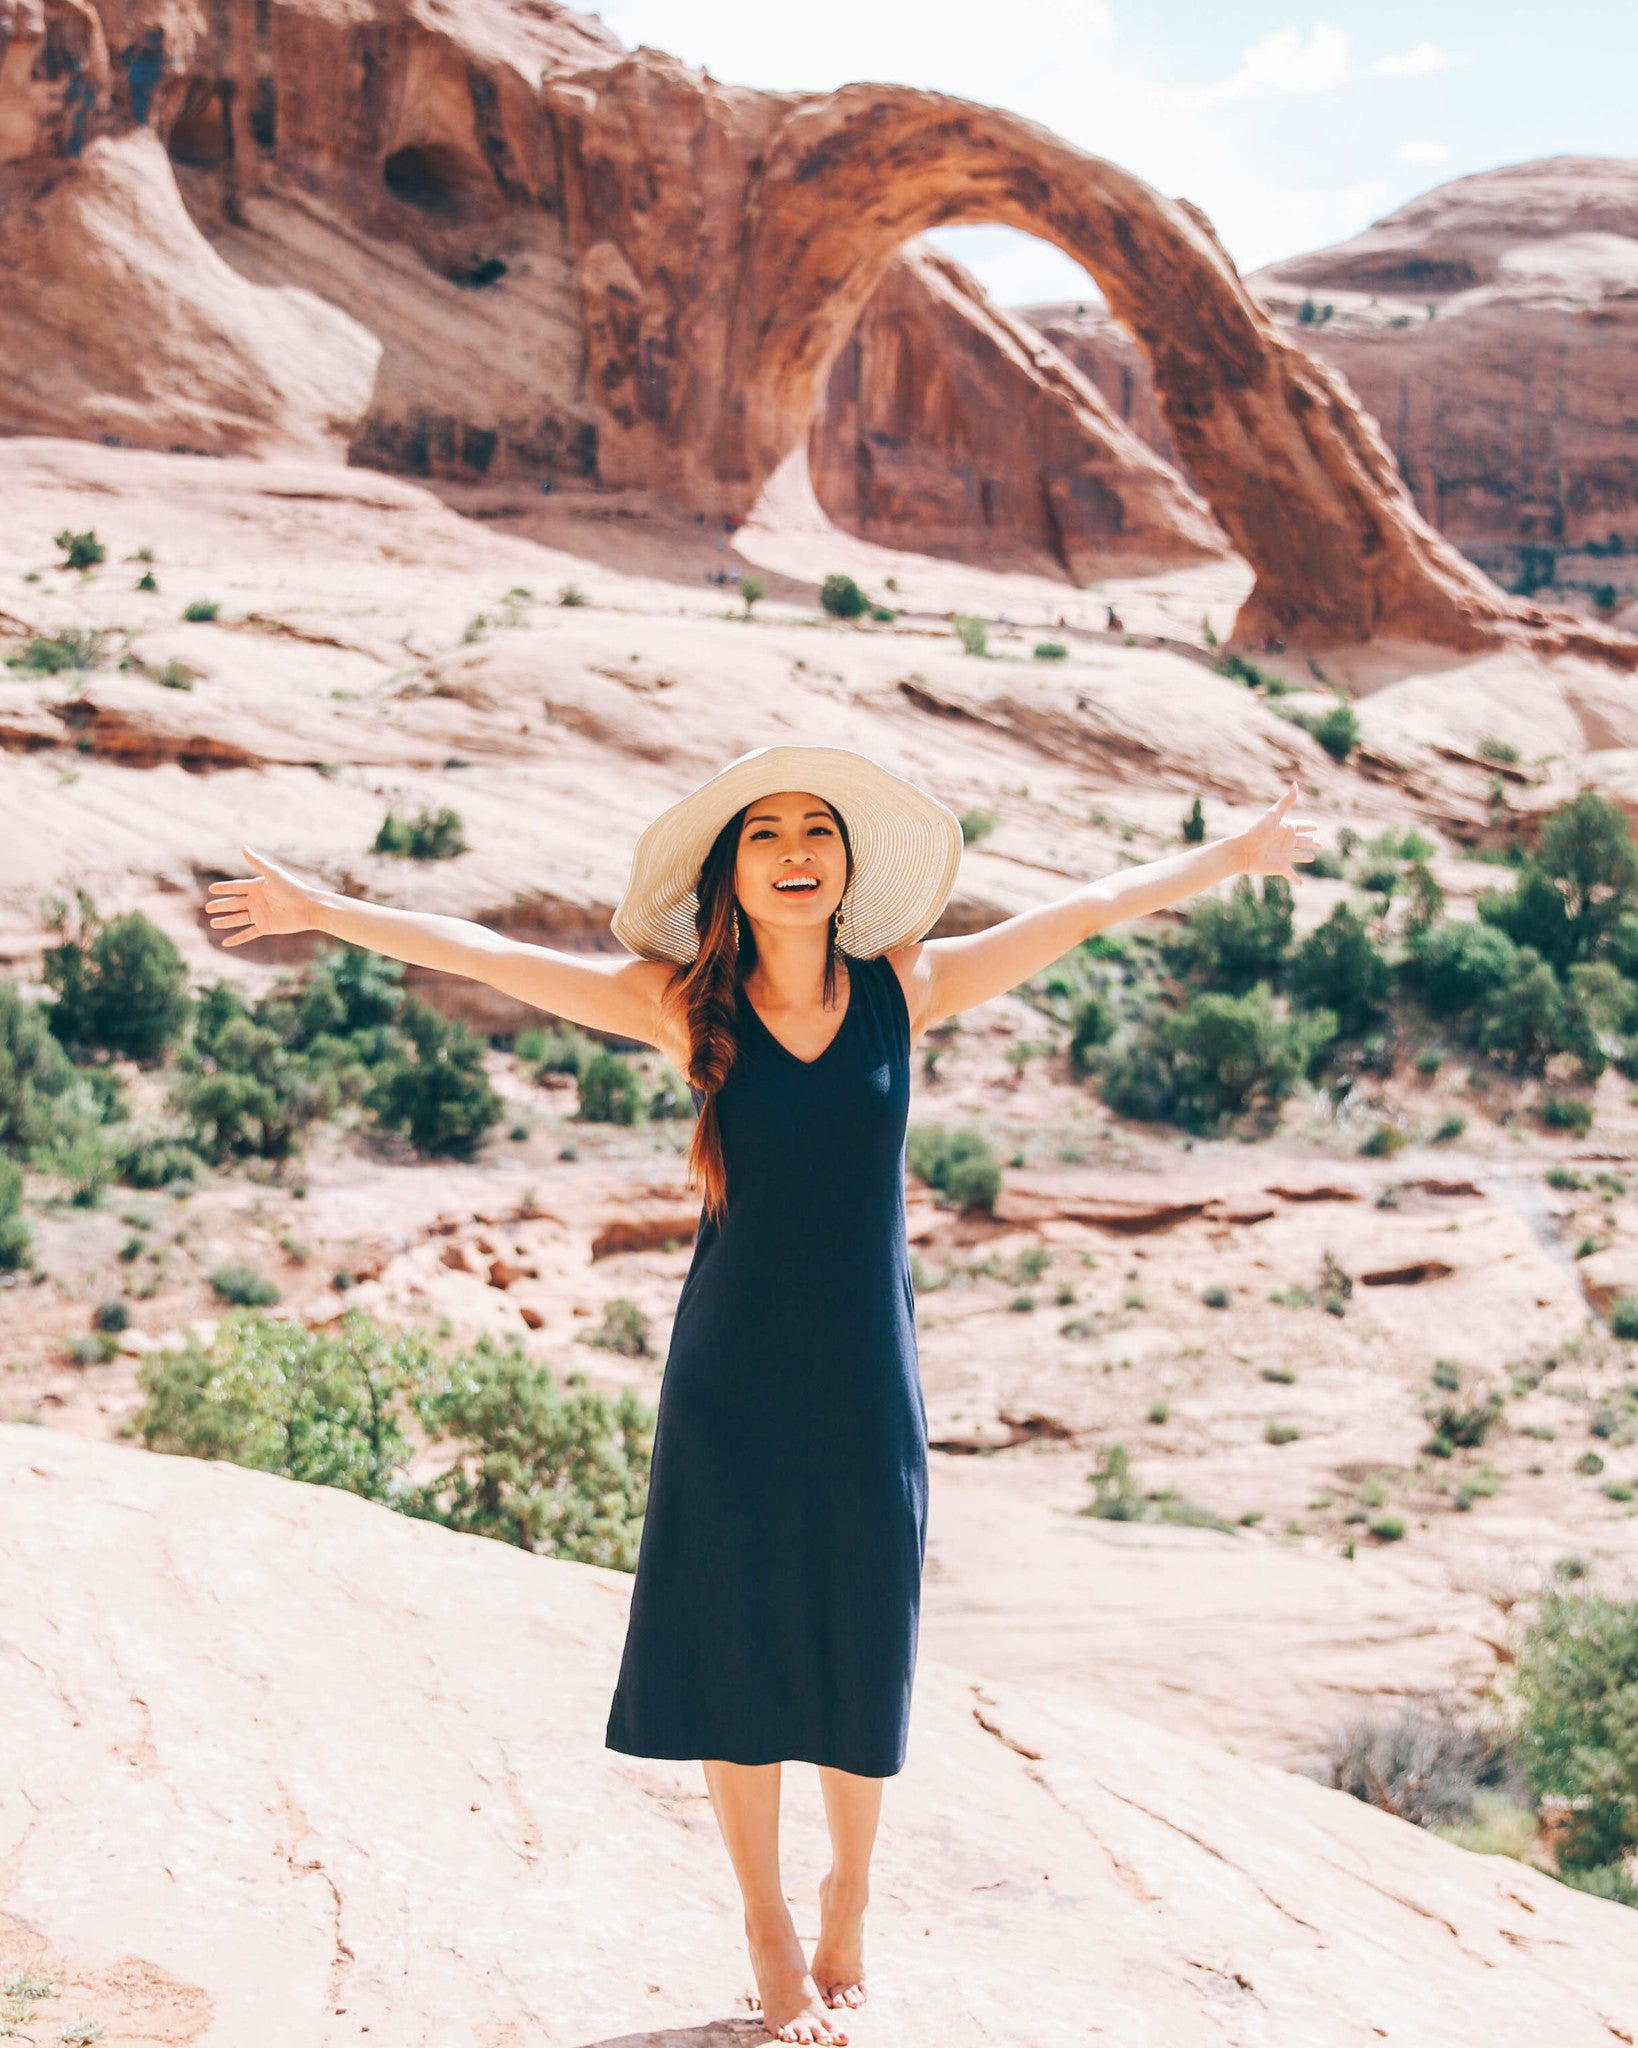 Wear a Sun Protective Dress on Your Next Hike. Seriously!